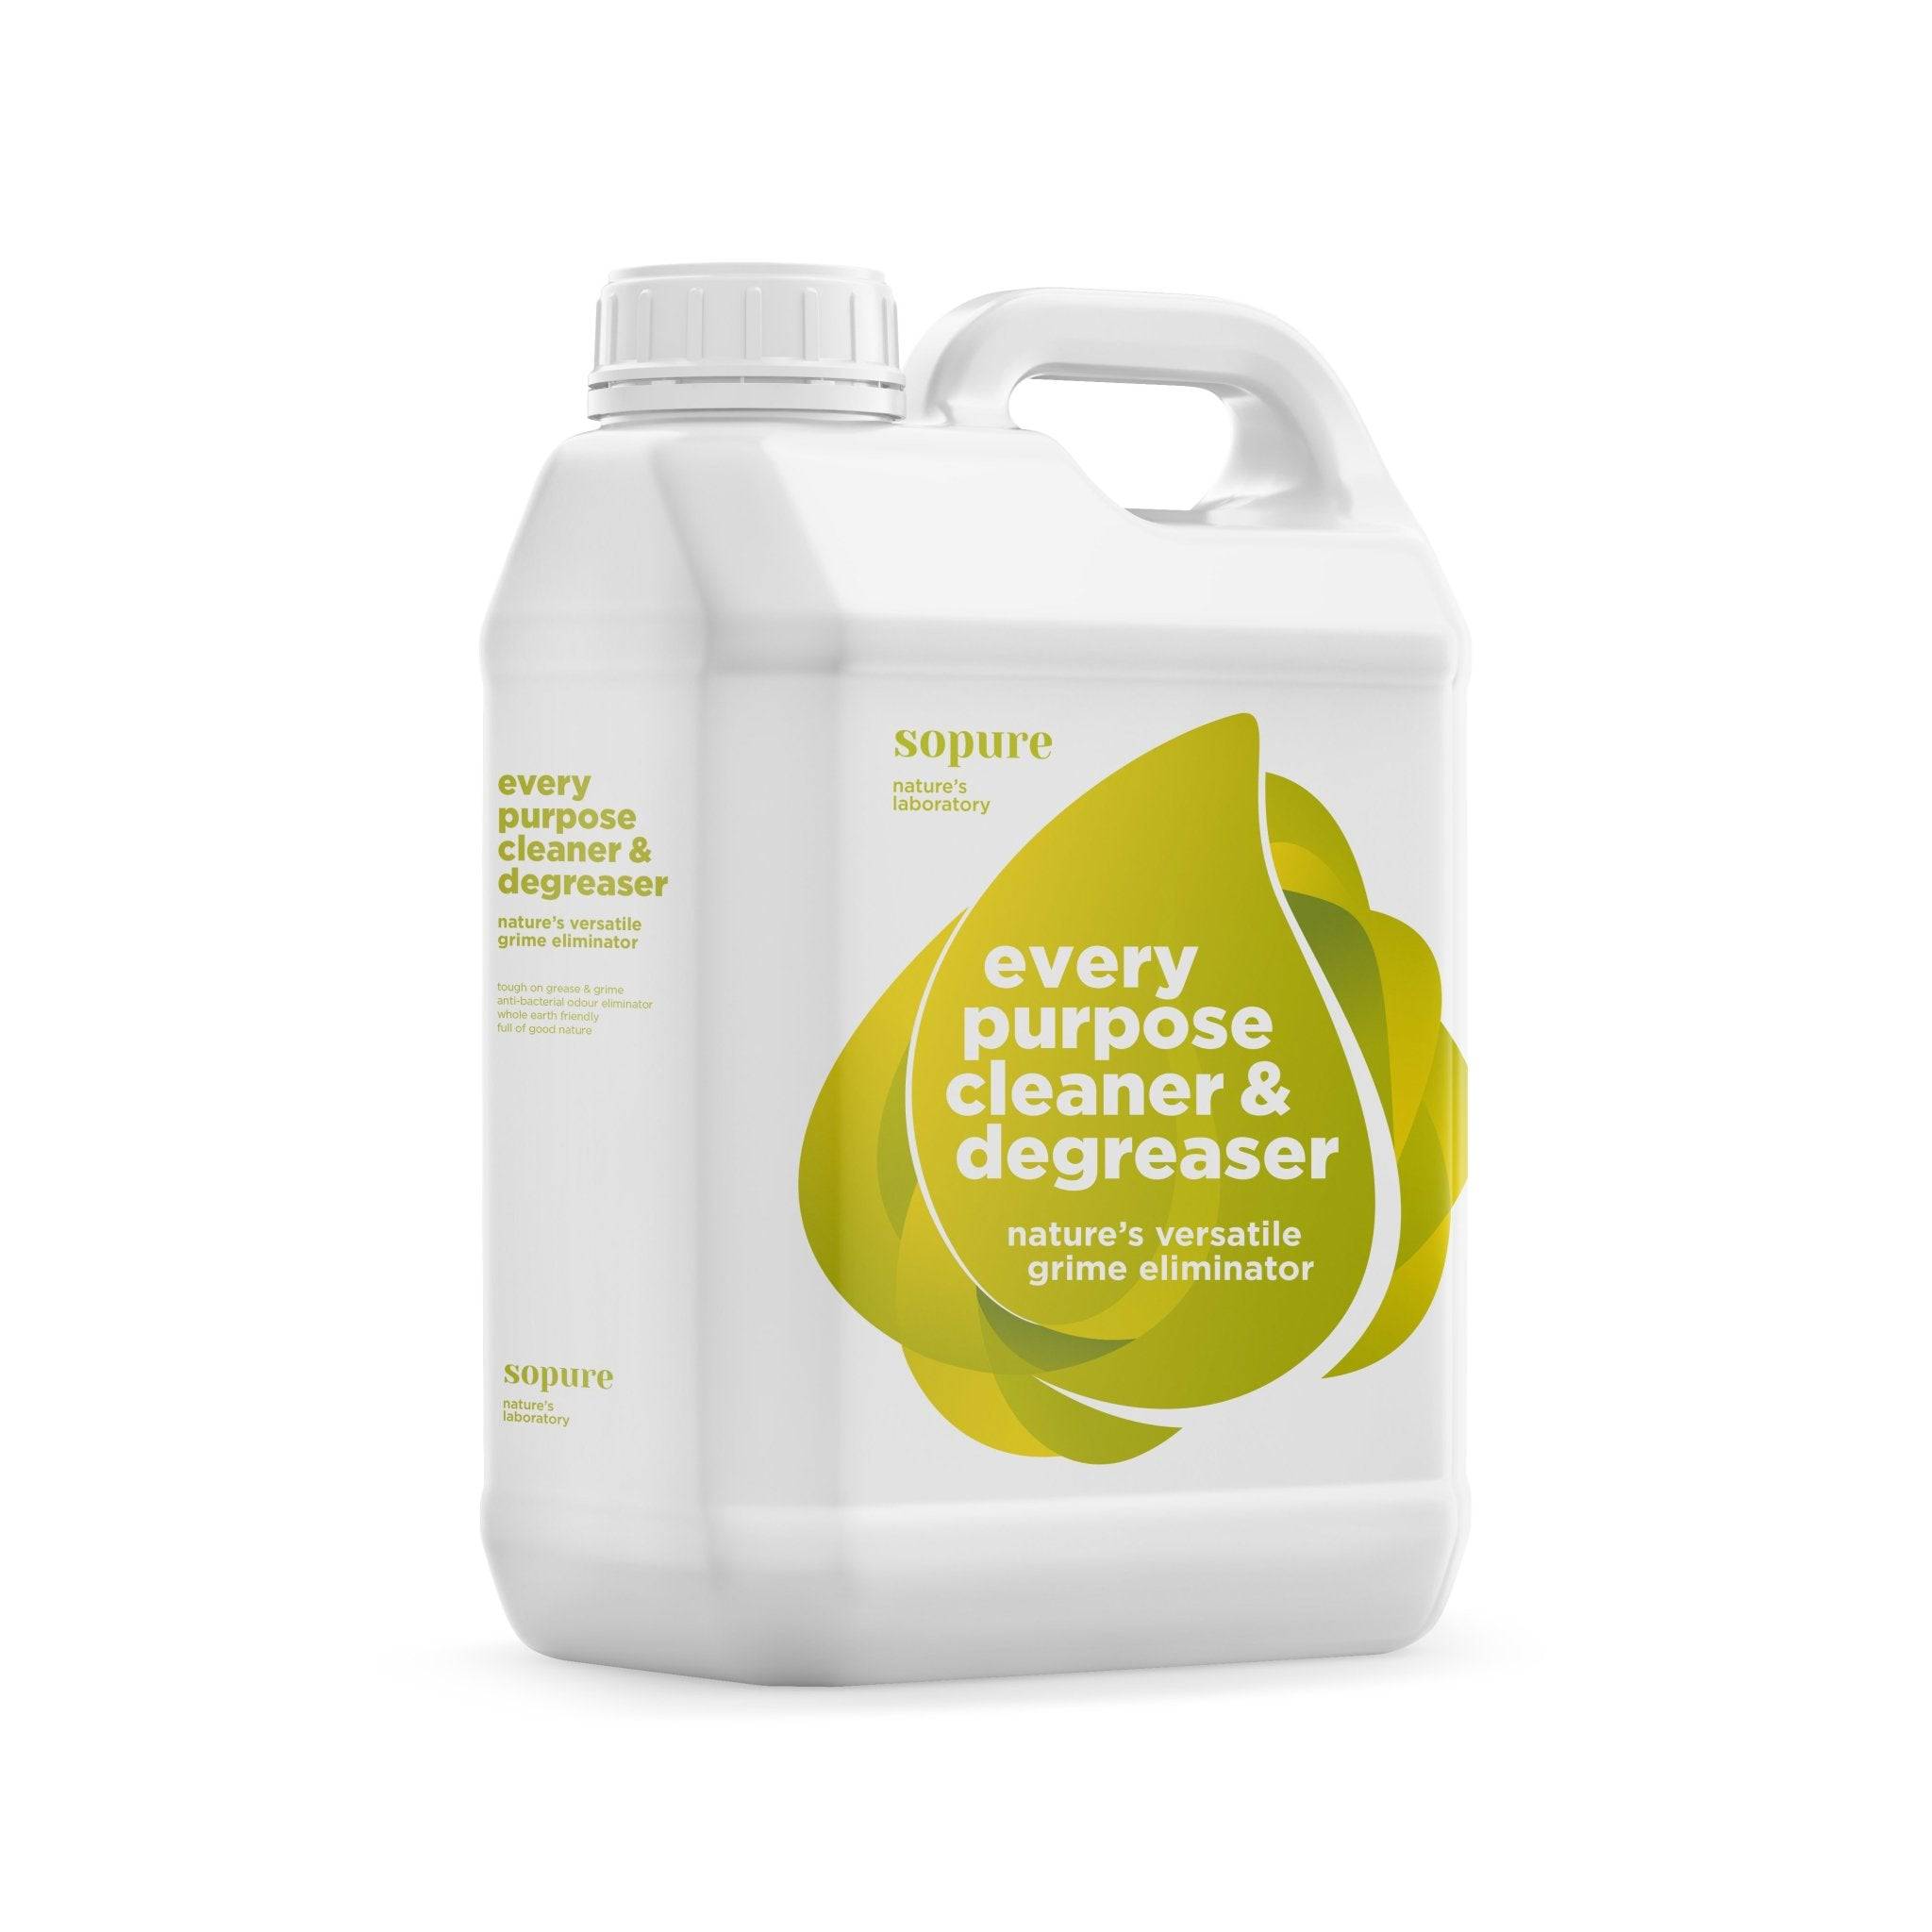 SoPure Every Purpose Cleaner & Degreaser - SoPure Naturally